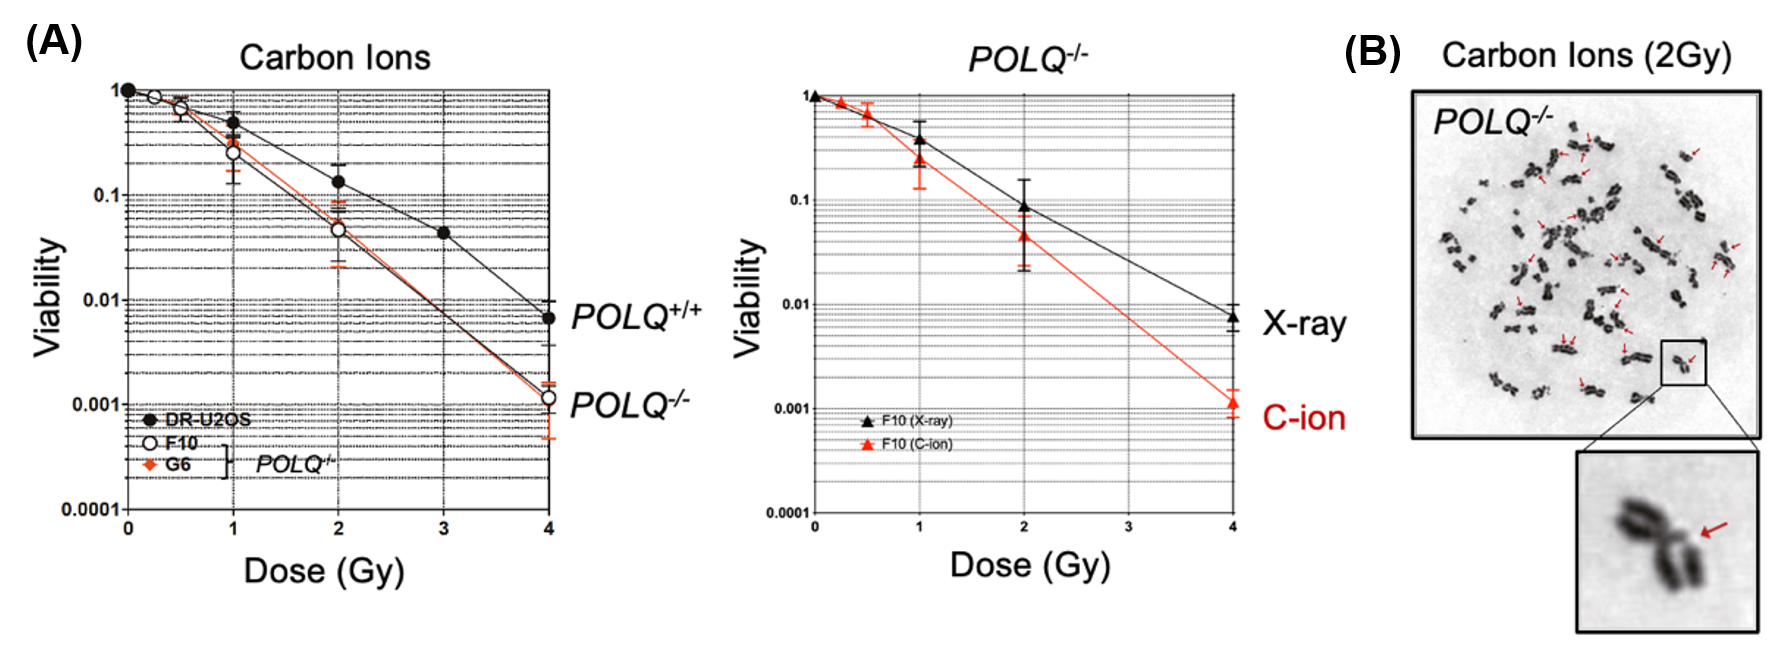 Figure 3. (A) Effect of POLQ deletion on cell survival fraction after carbon ion or x-ray irradiation. (B) POLQ deletion increases chromatid breaks after carbon ion irradiation.